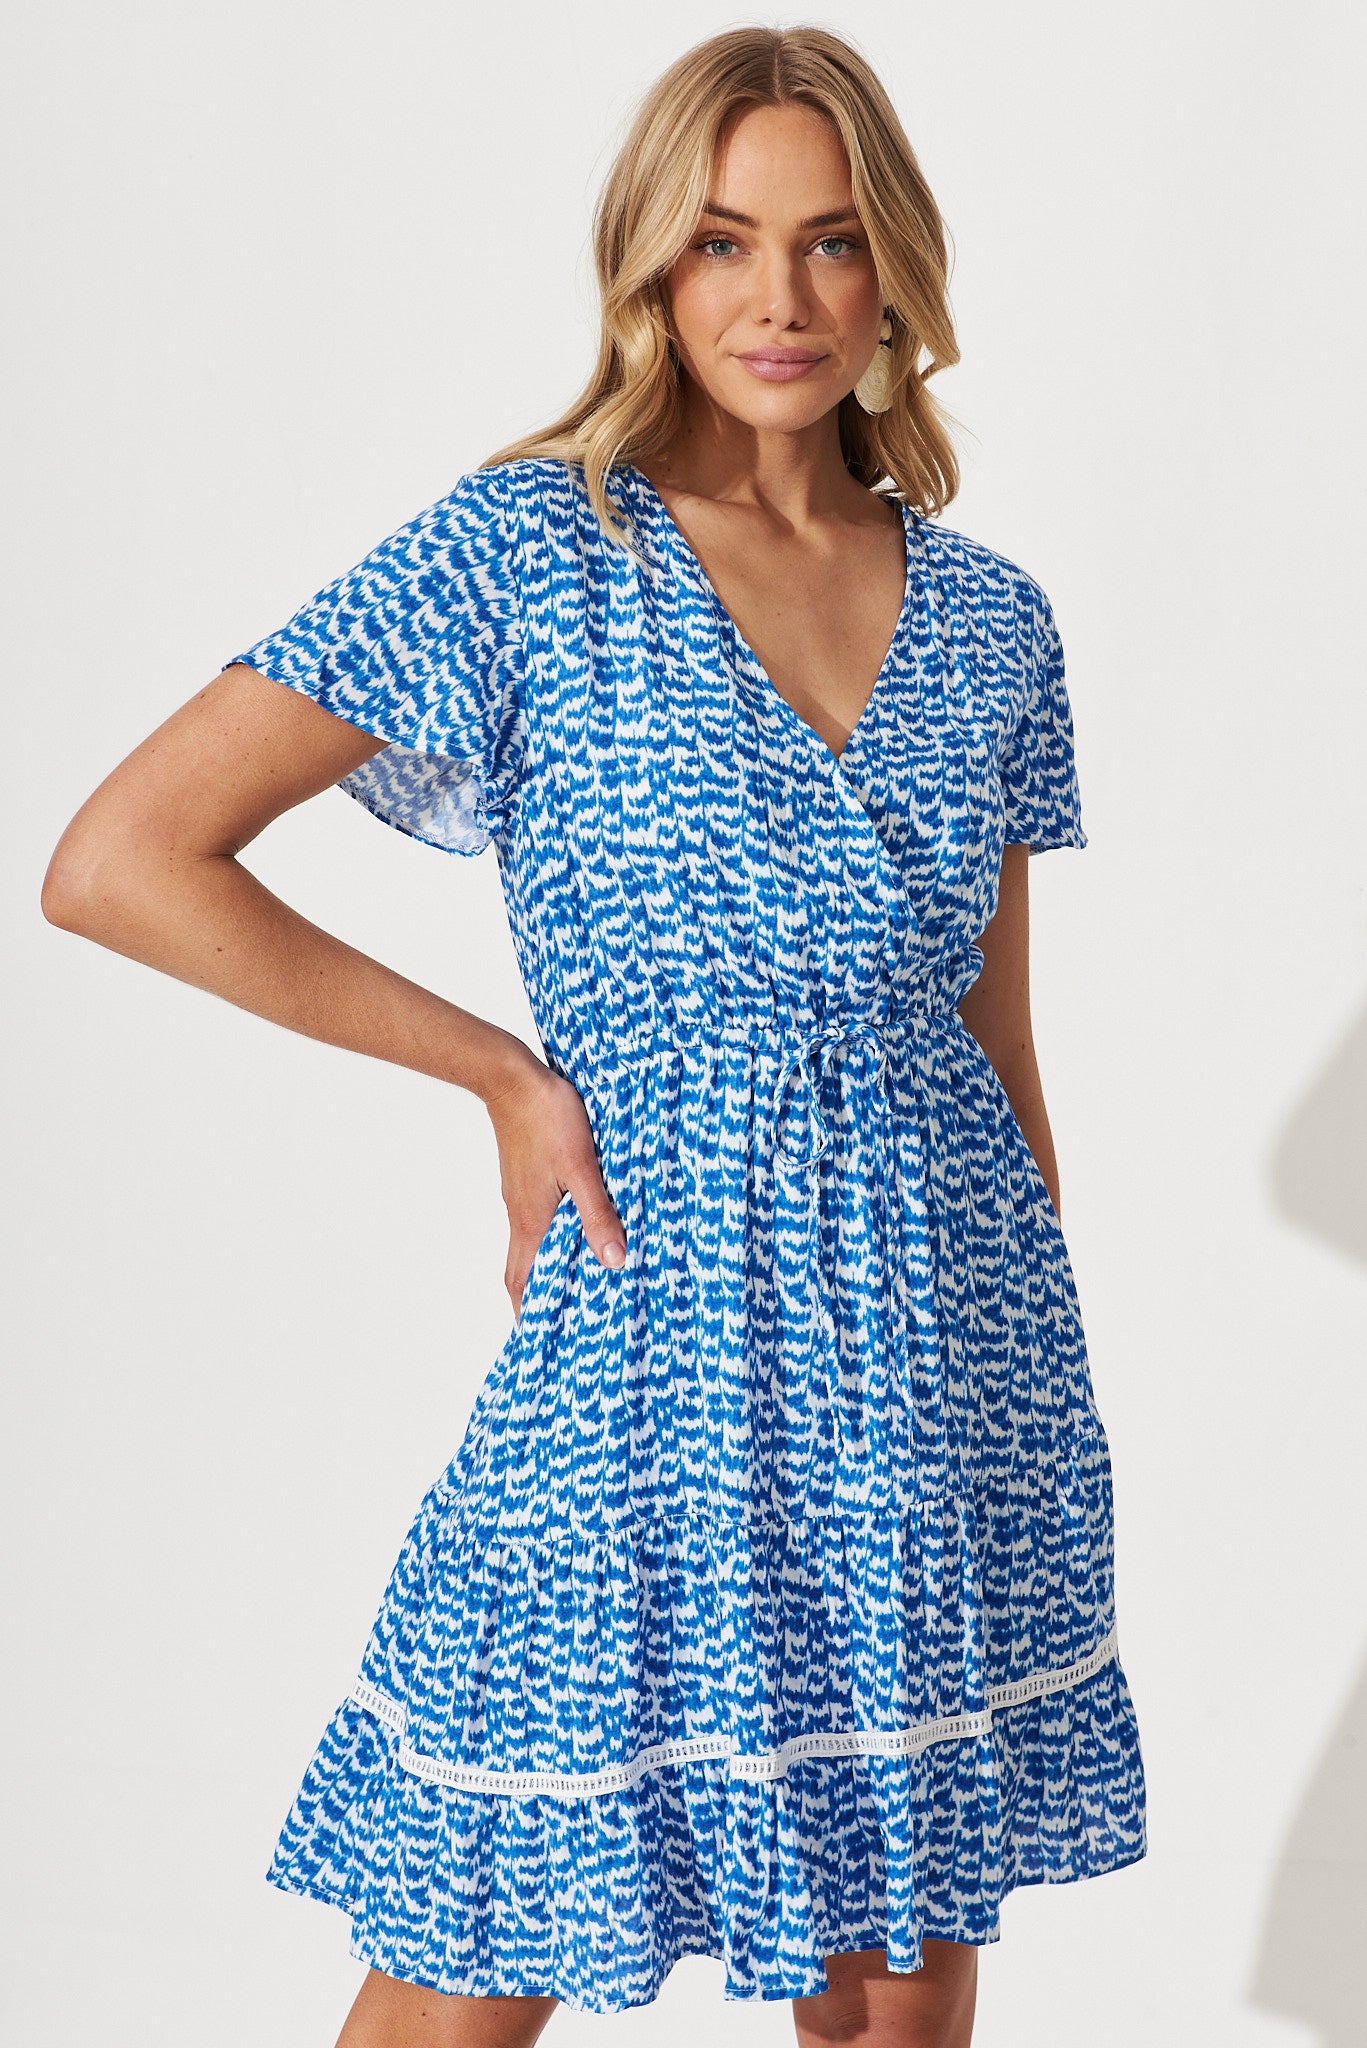 Aquarius Dress In Cobalt Blue With White Print - front